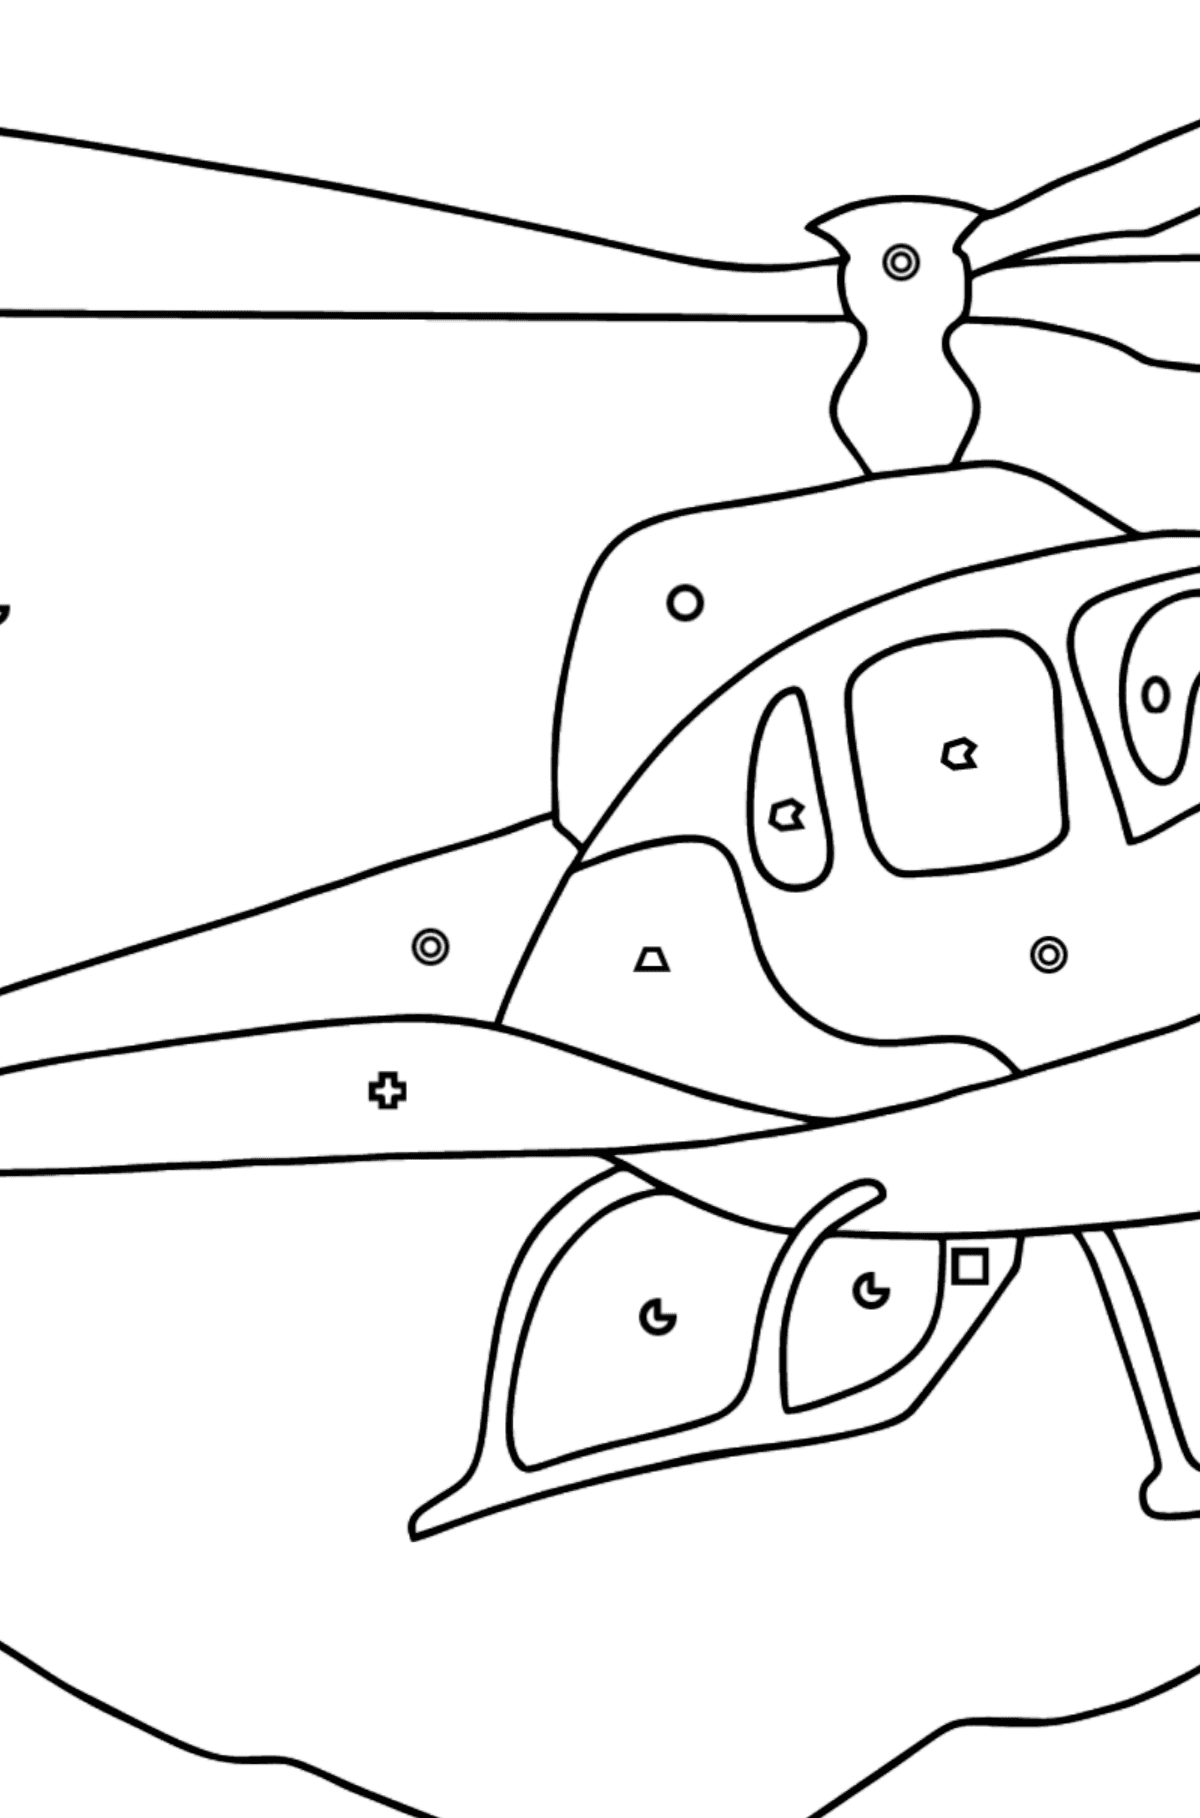 Coloring Page - A City Helicopter - Coloring by Geometric Shapes for Kids